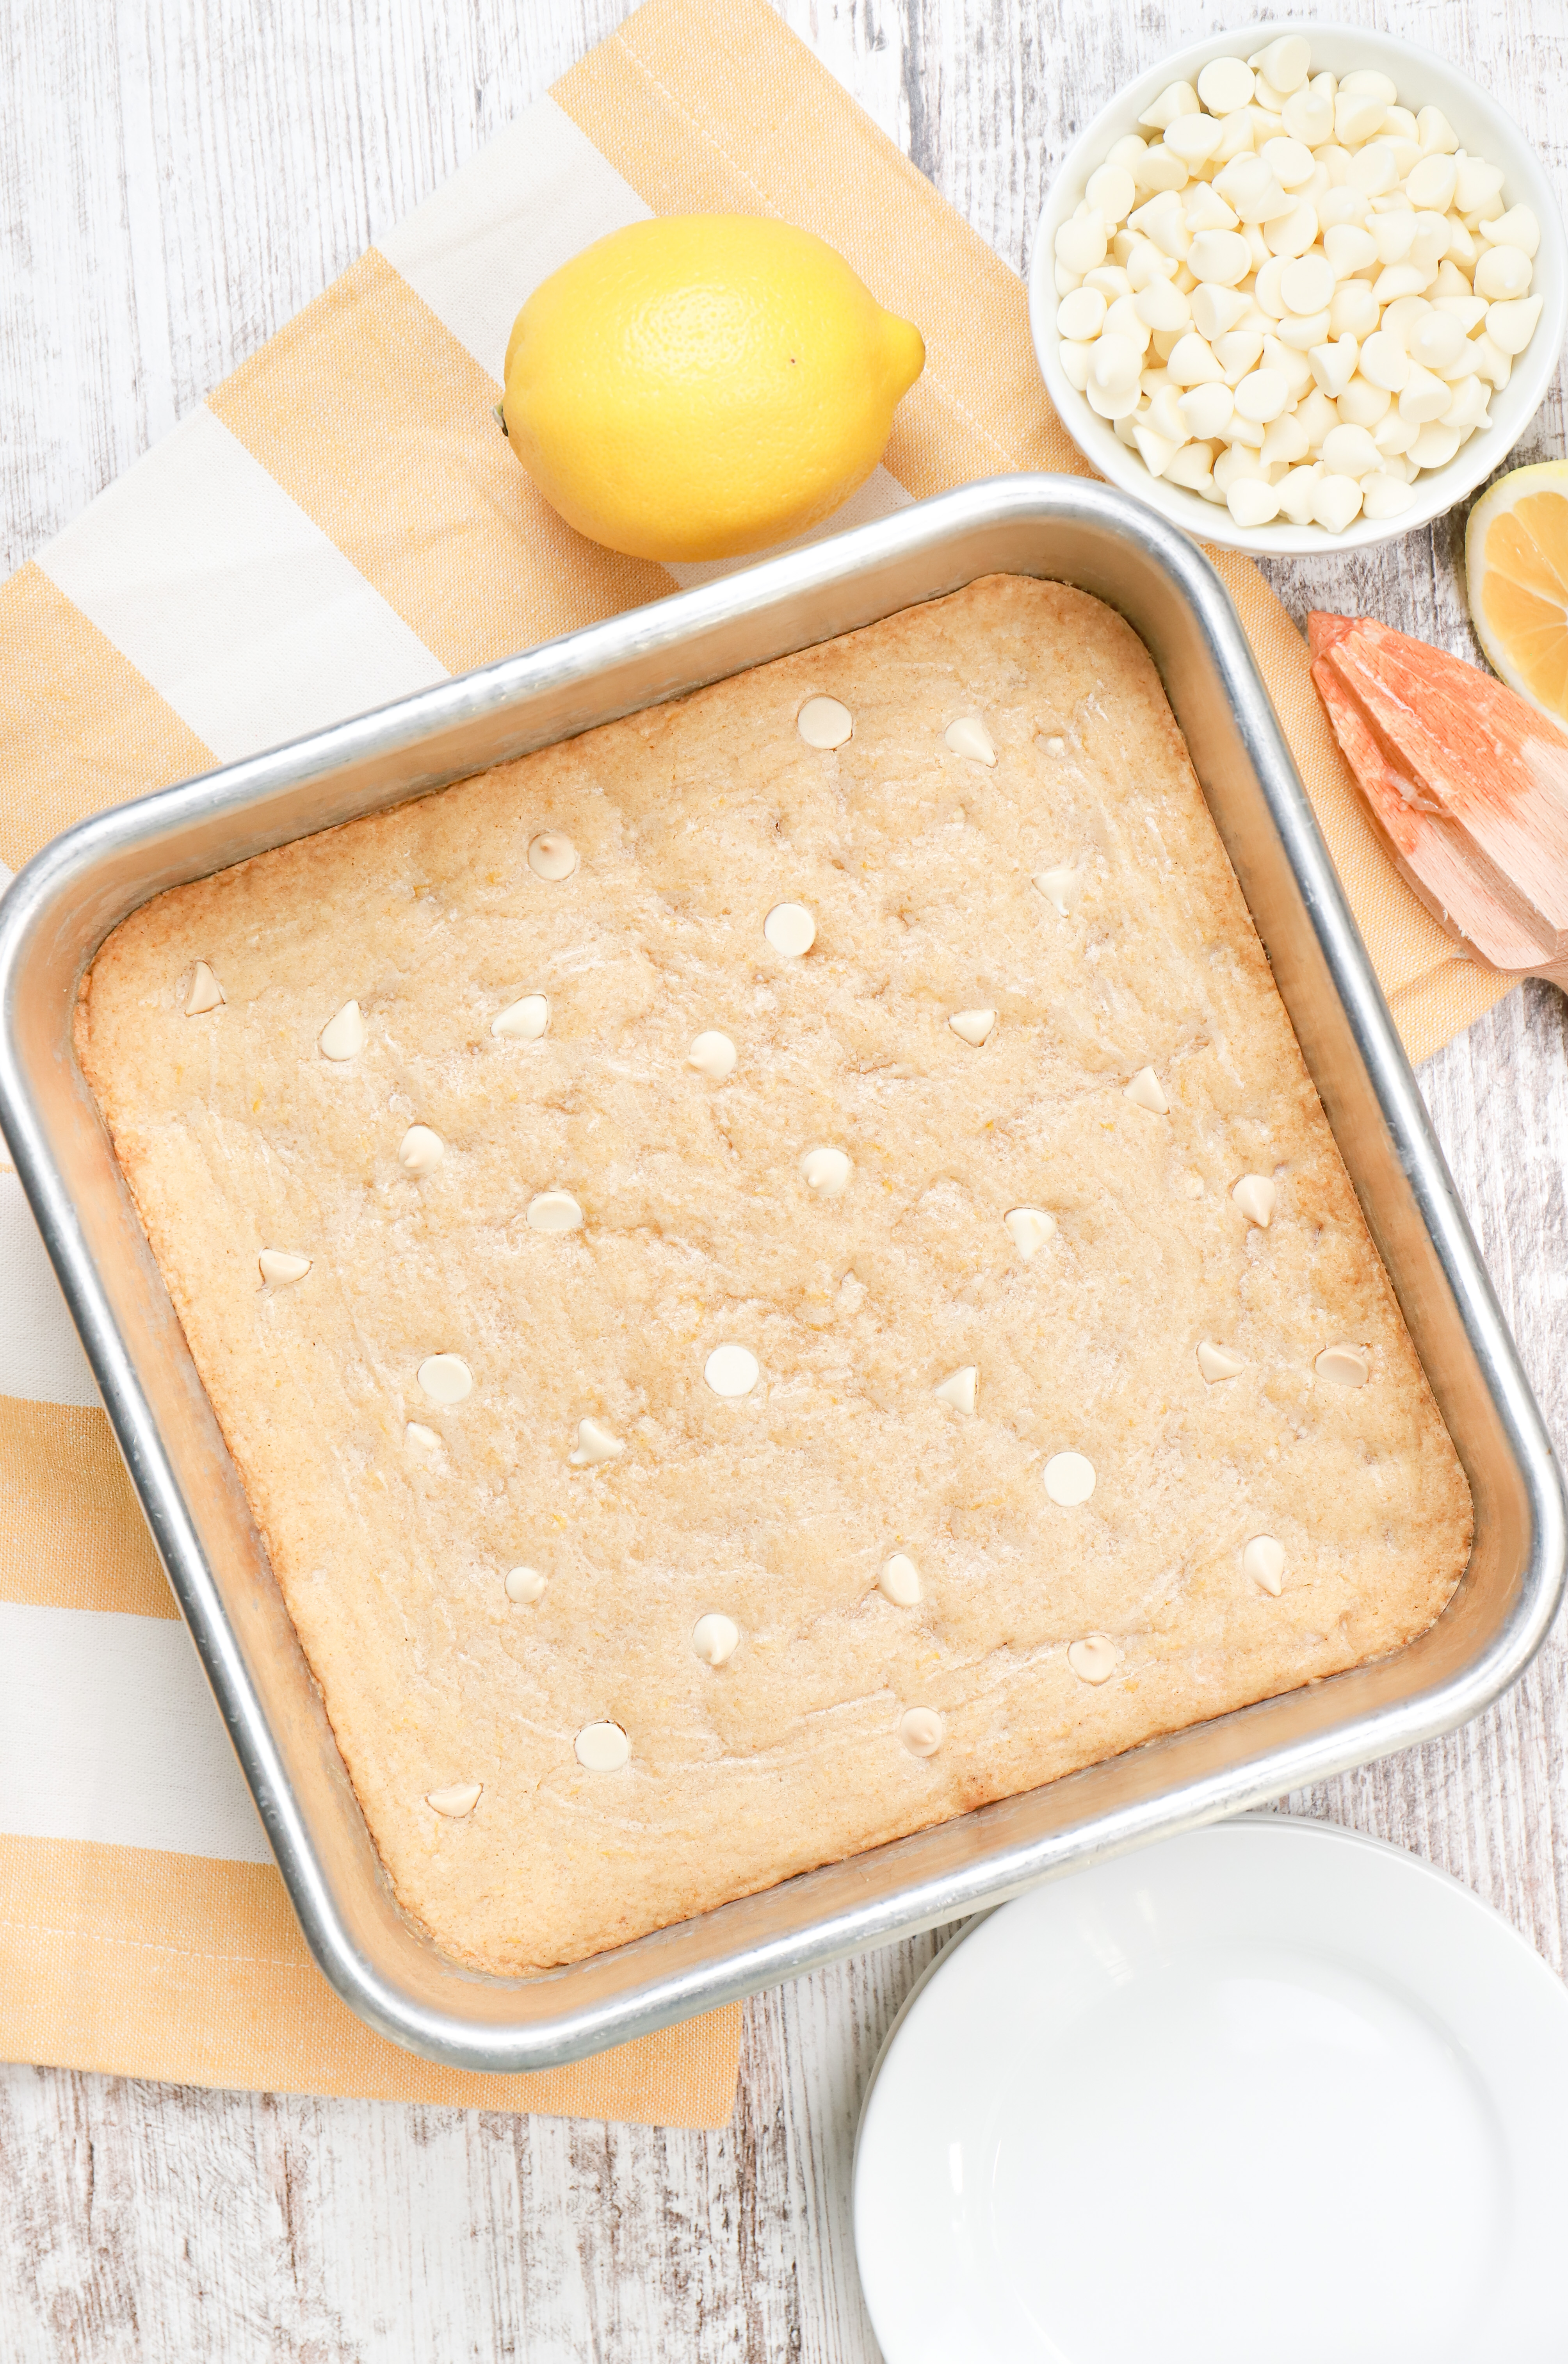 Overhead view of a batch of white chocolate lemon blondies in an aluminum baking dish.